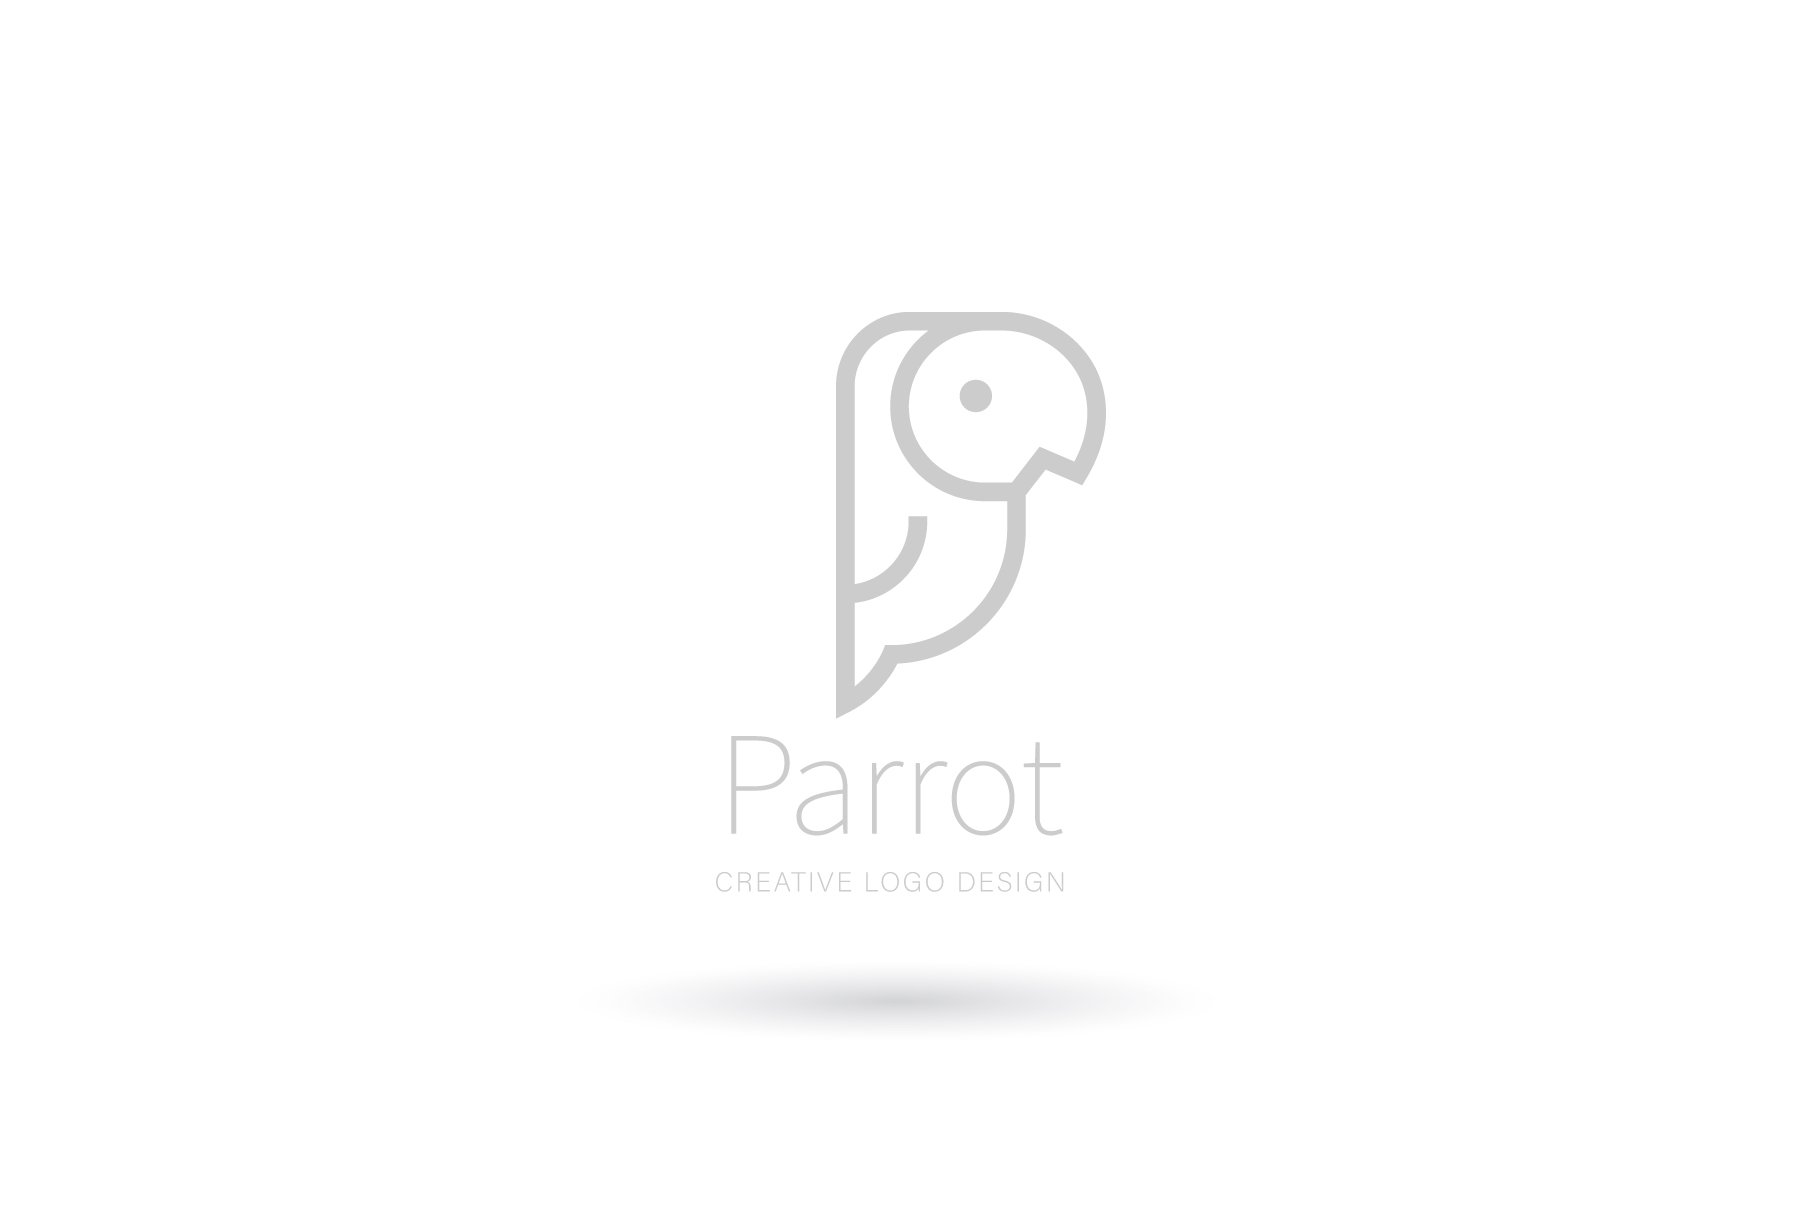 Parrot logo preview image.